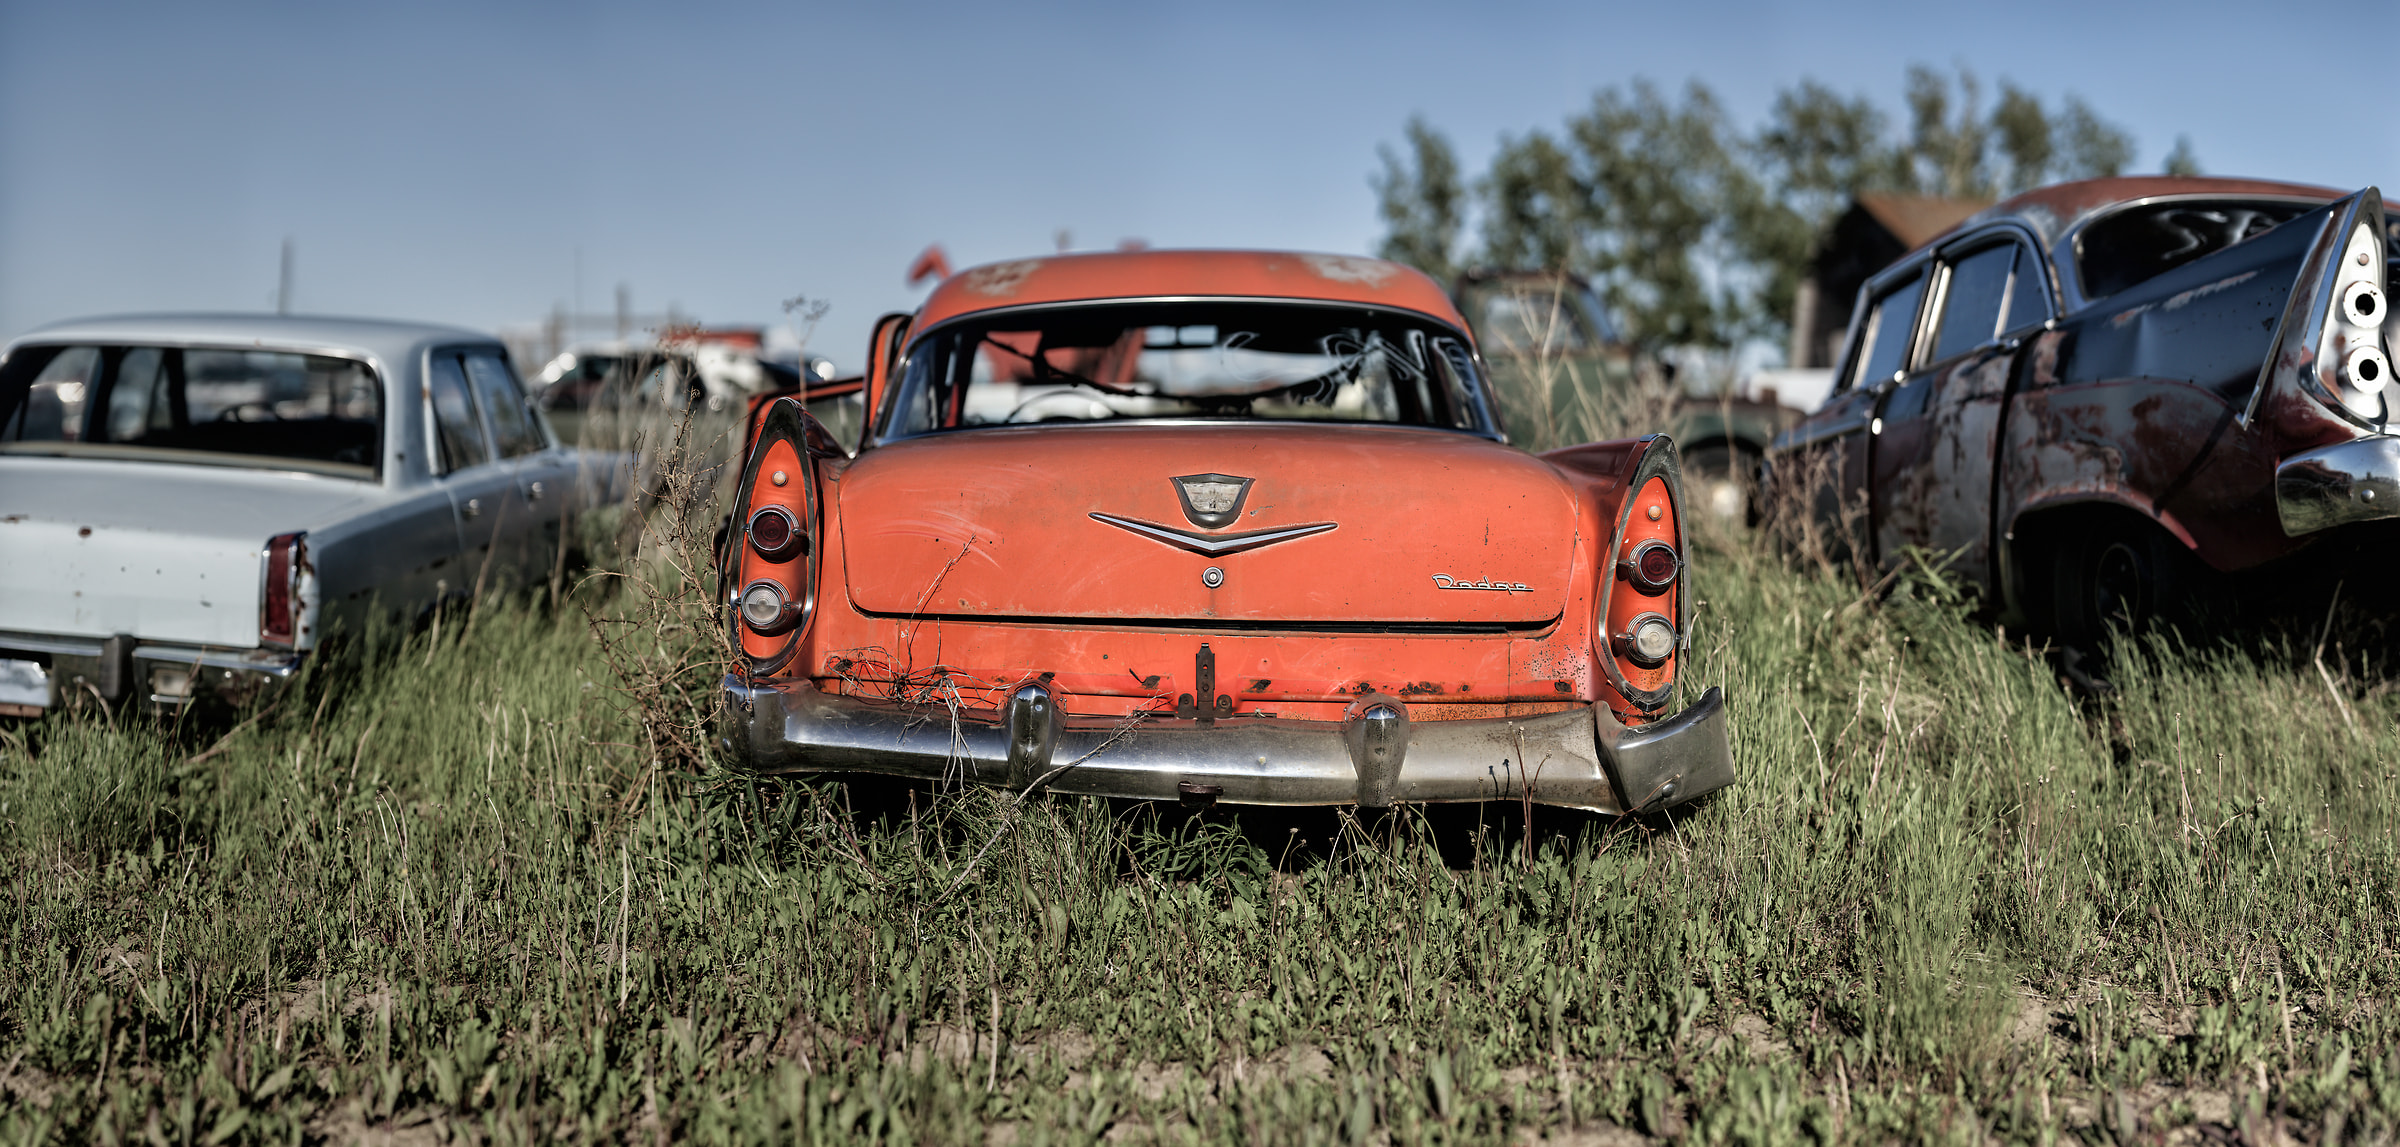 2,005 megapixels! A very high resolution, large-format VAST photo print of a vintage car; photograph created by Scott Dimond in 